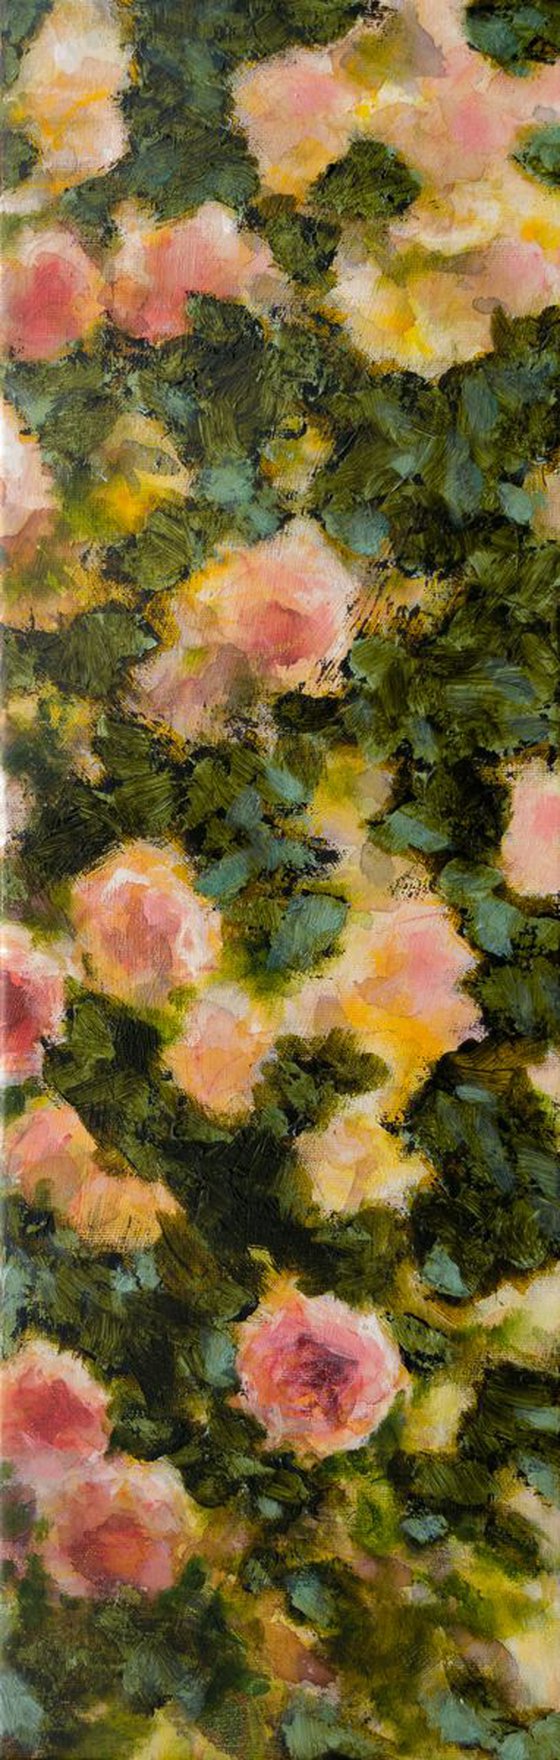 Roses in the summer light Floral painting Oil Mixed media on canvas